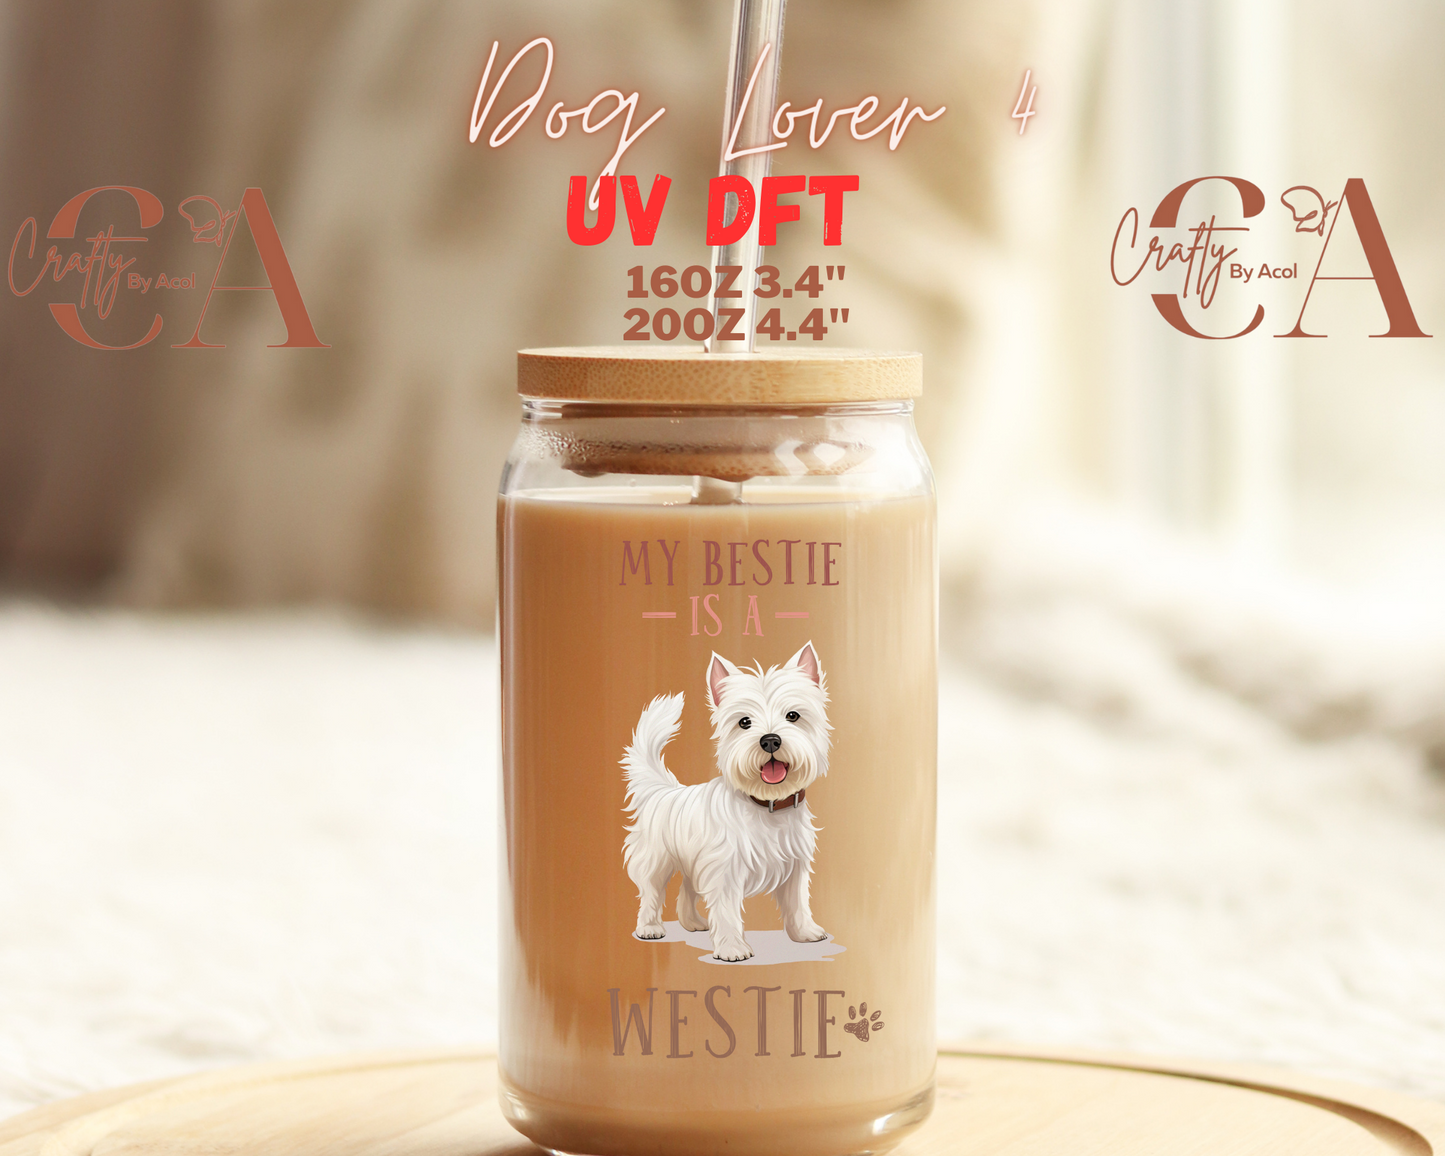 Dog Lover Decal UV DFT Decal